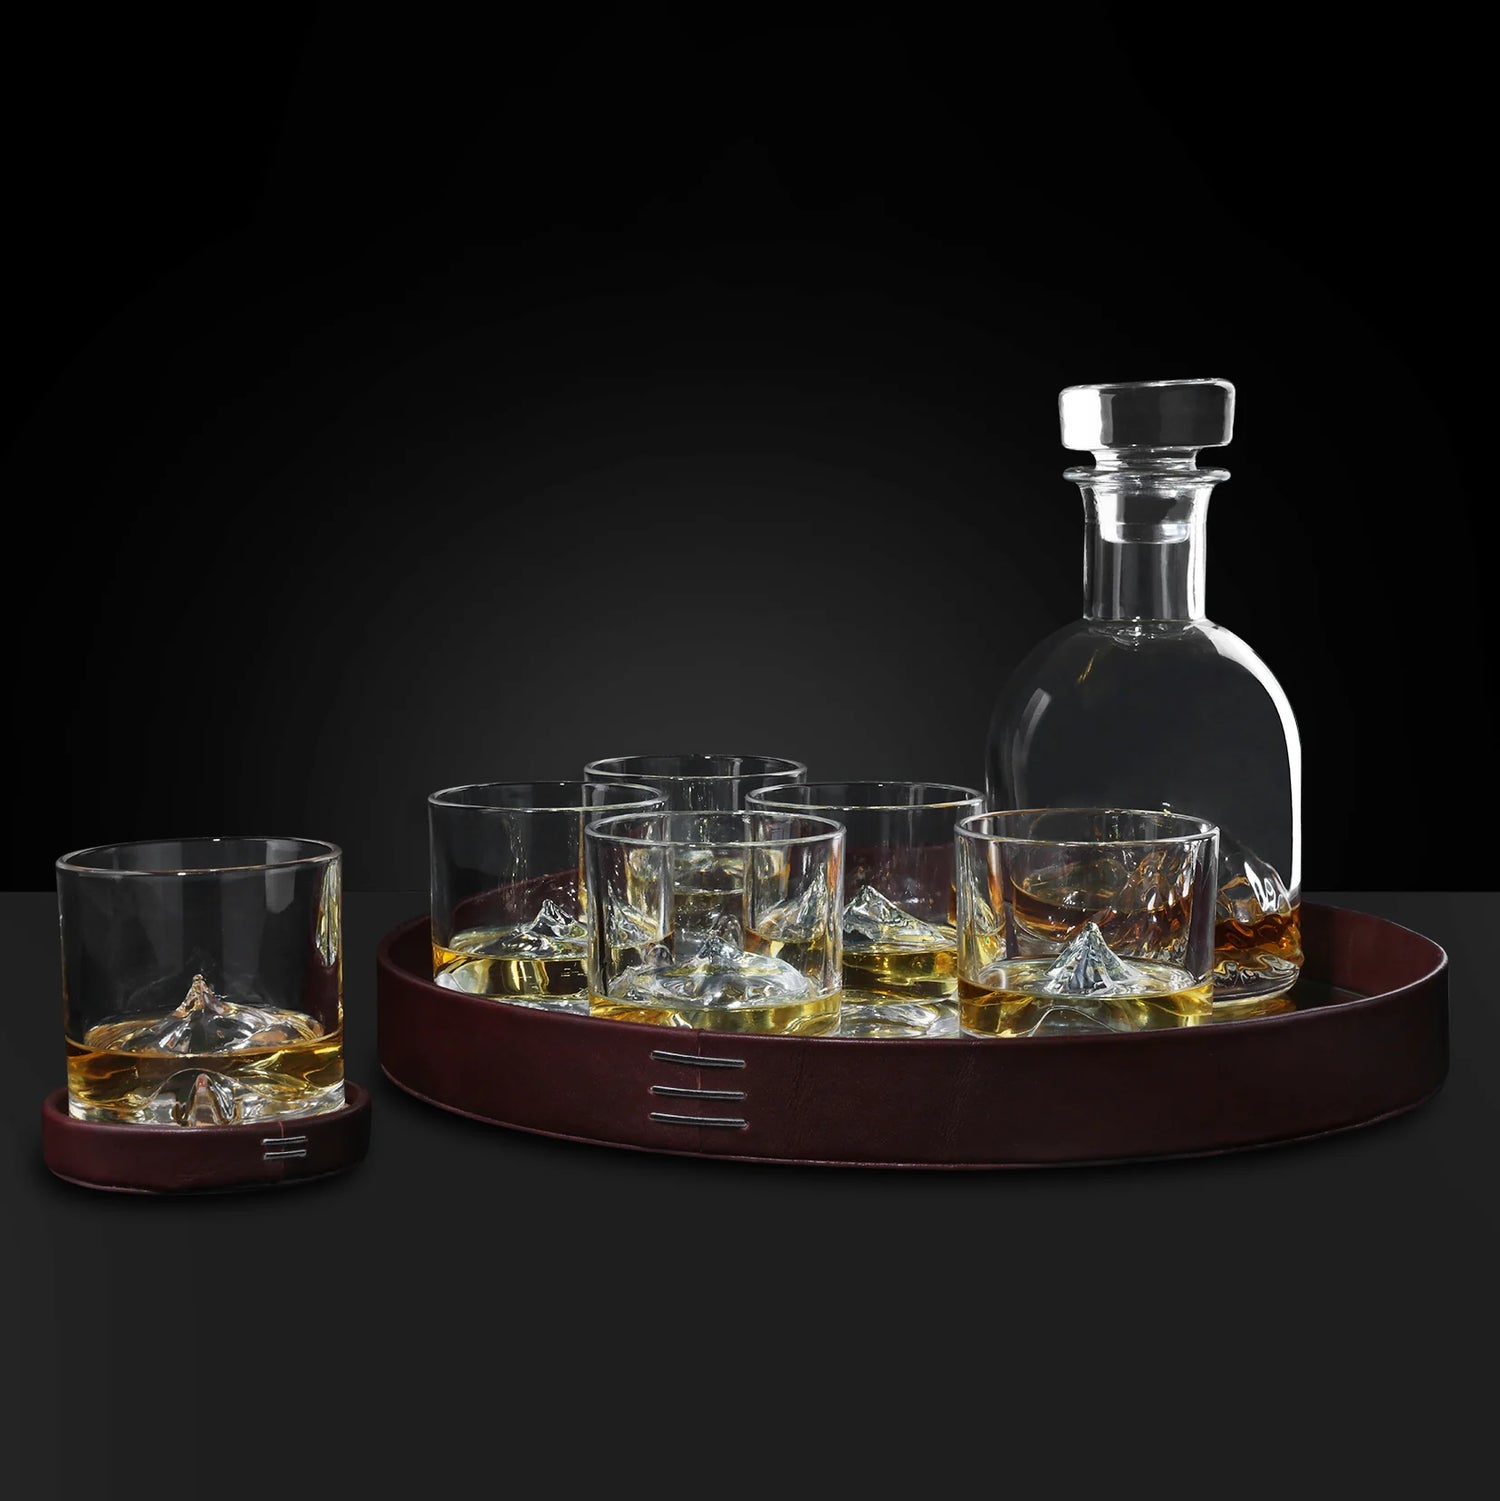 Italian Crafted Crystal Whiskey Decanter & Whiskey Glasses Set – Wooden Cork